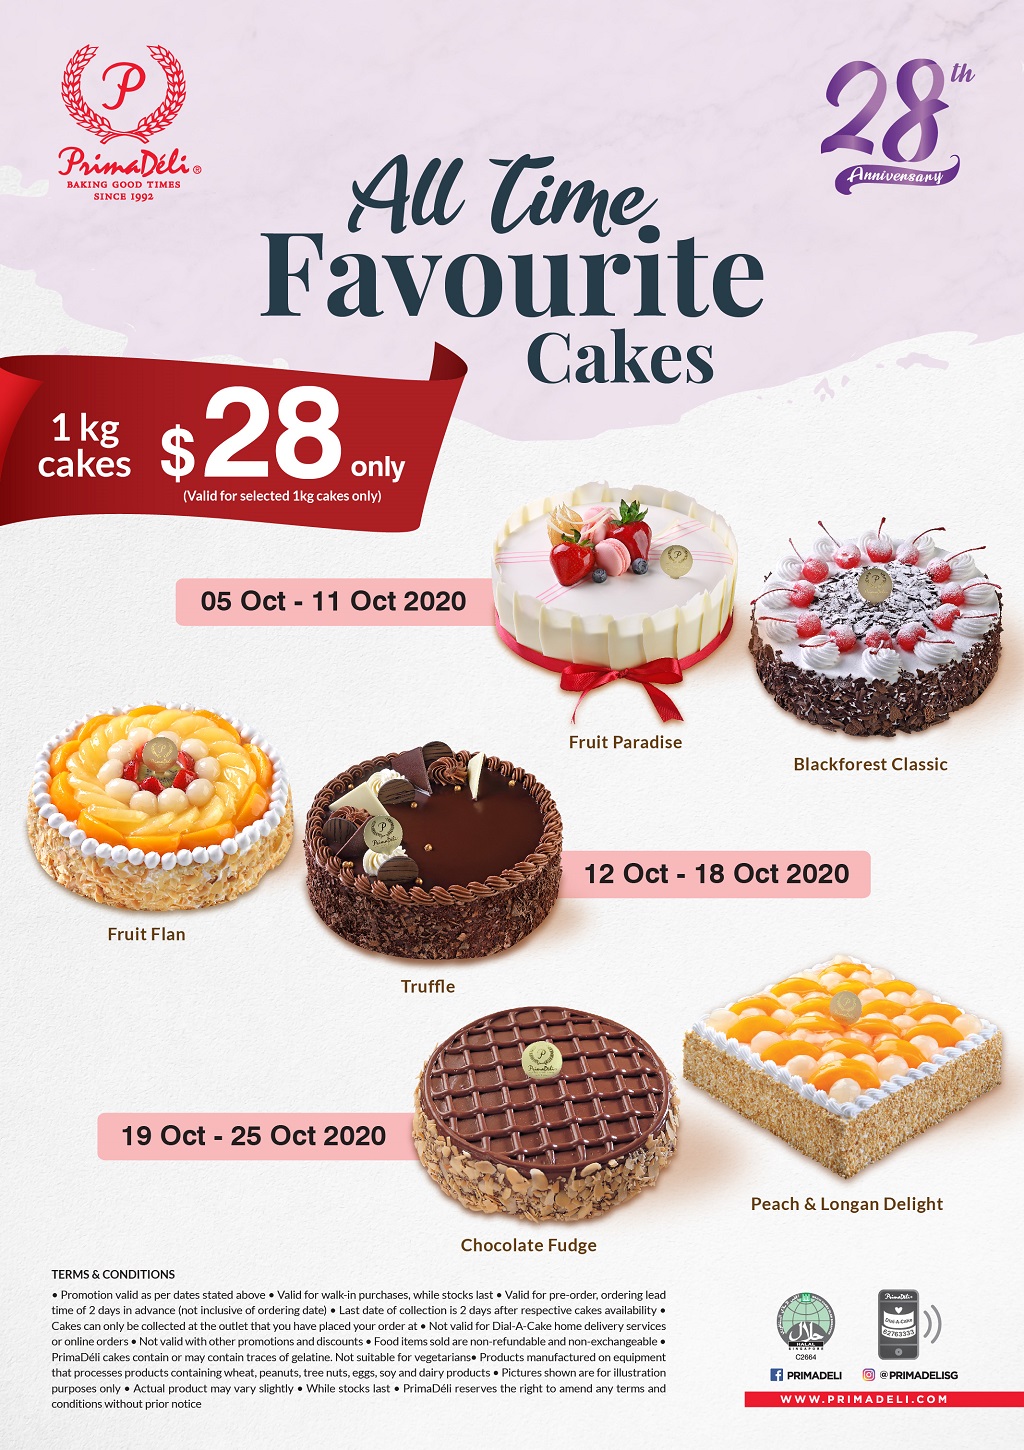 PrimaDeli celebrates 28th anniversary with $28 cakes (U.P. $43.80) from now till 25 Oct 2020 - 1